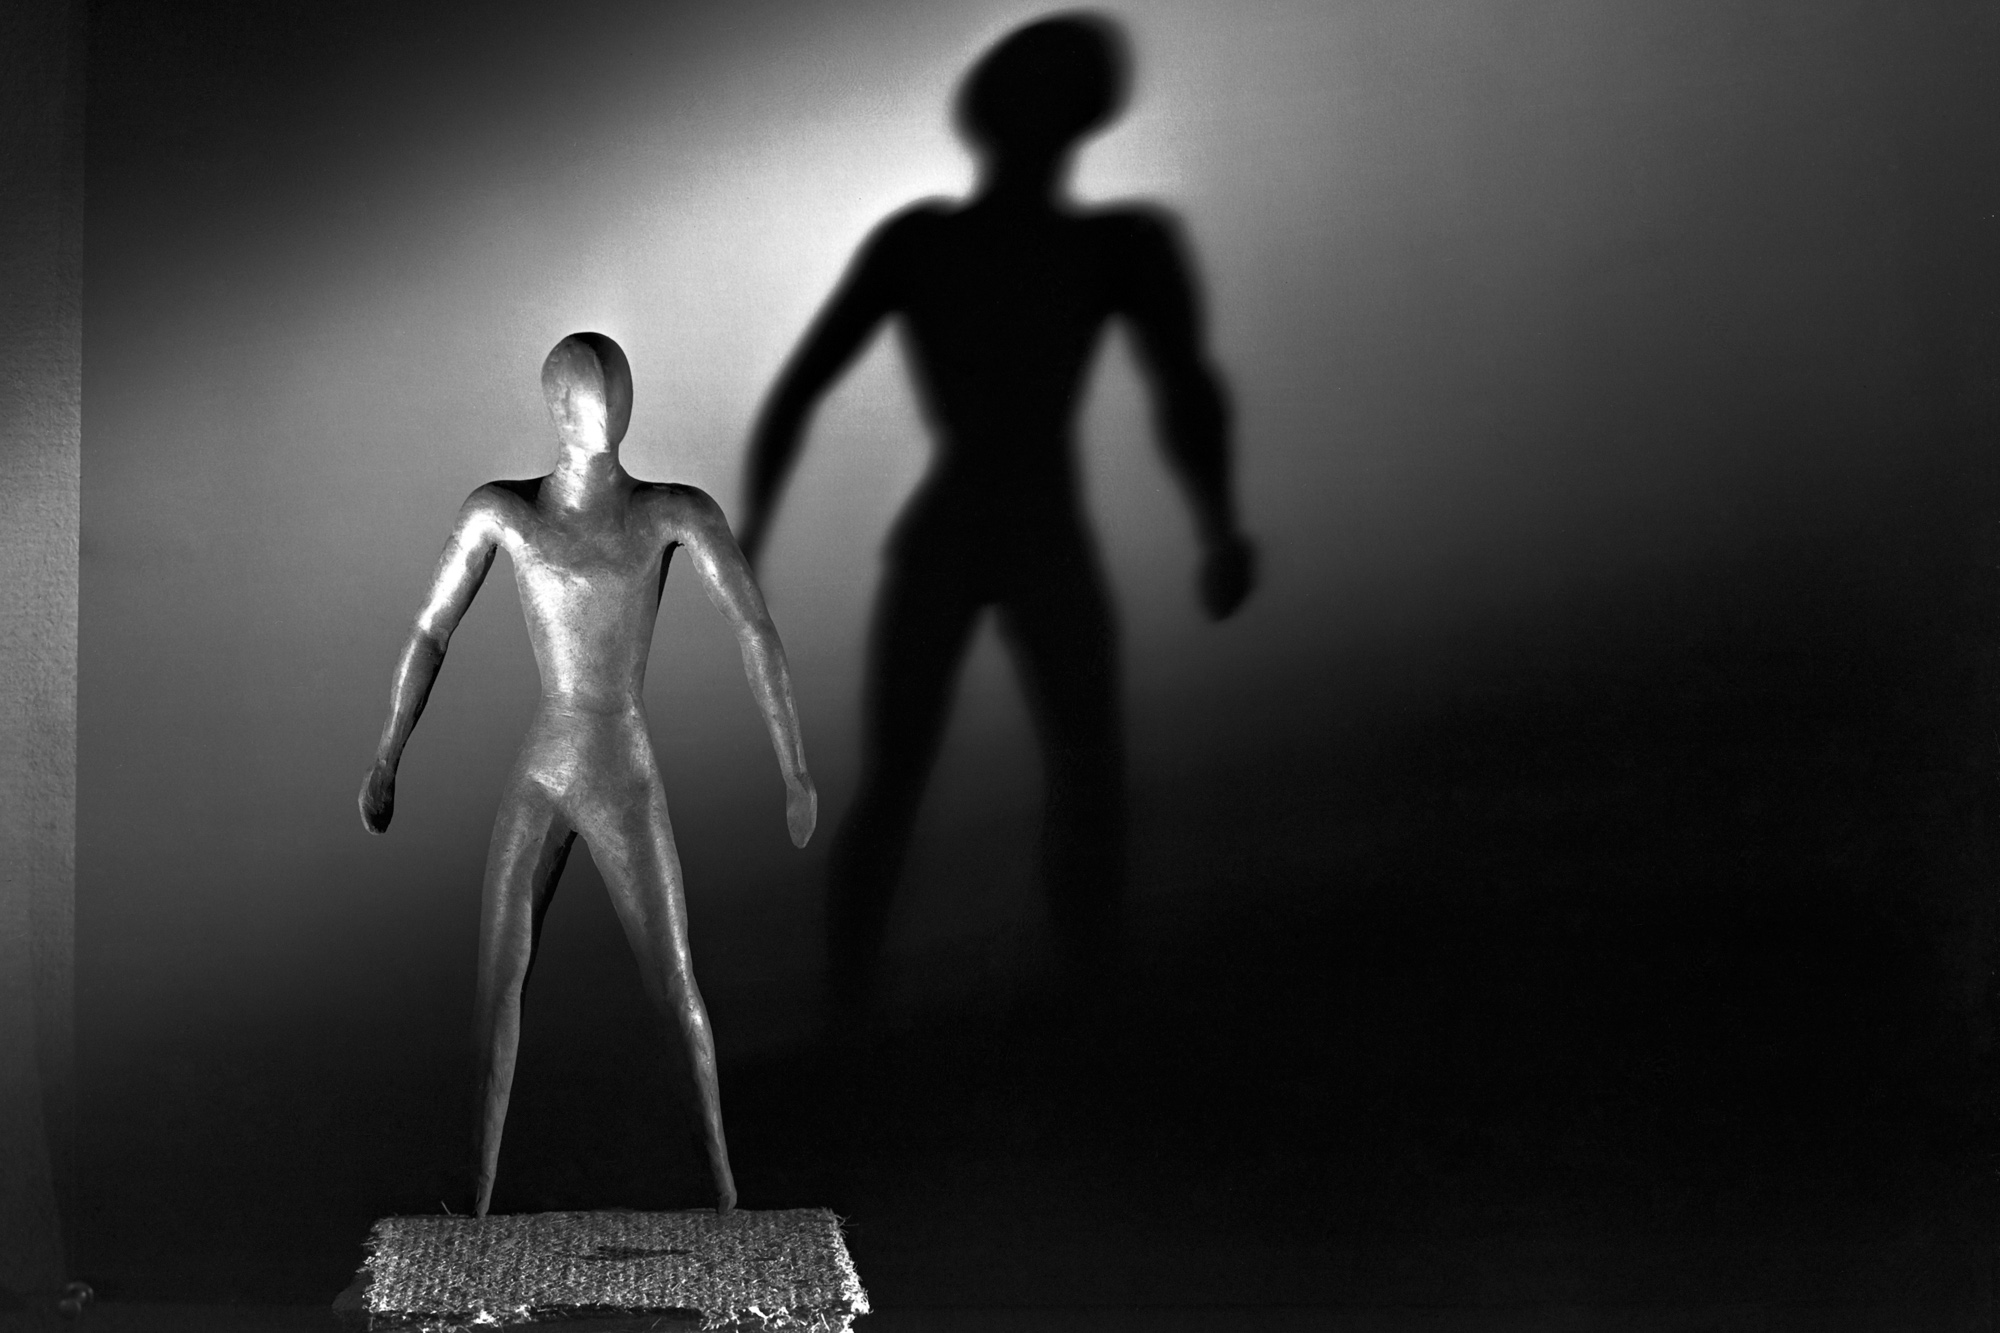 Black and white image of a human-shaped sculpture illuminated from the right side.